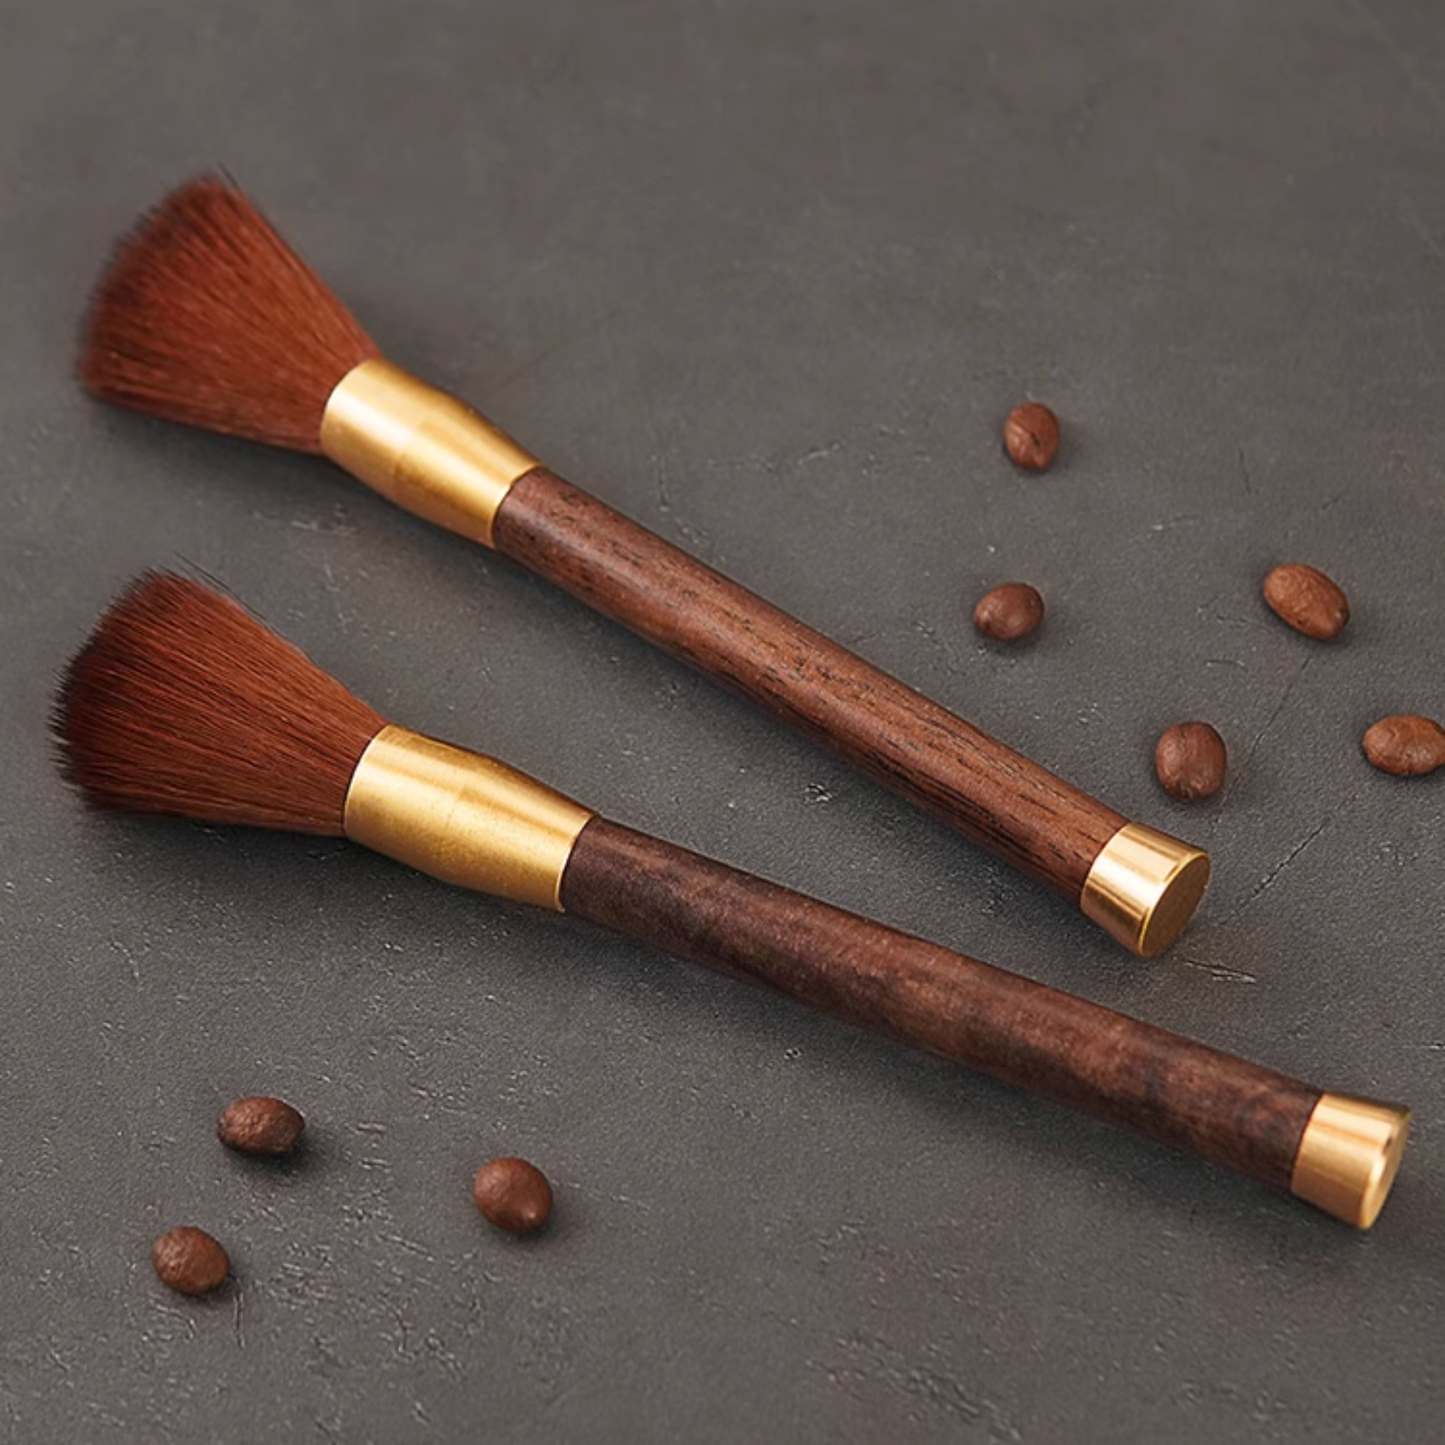 Wooden Grinder Cleaning Brush